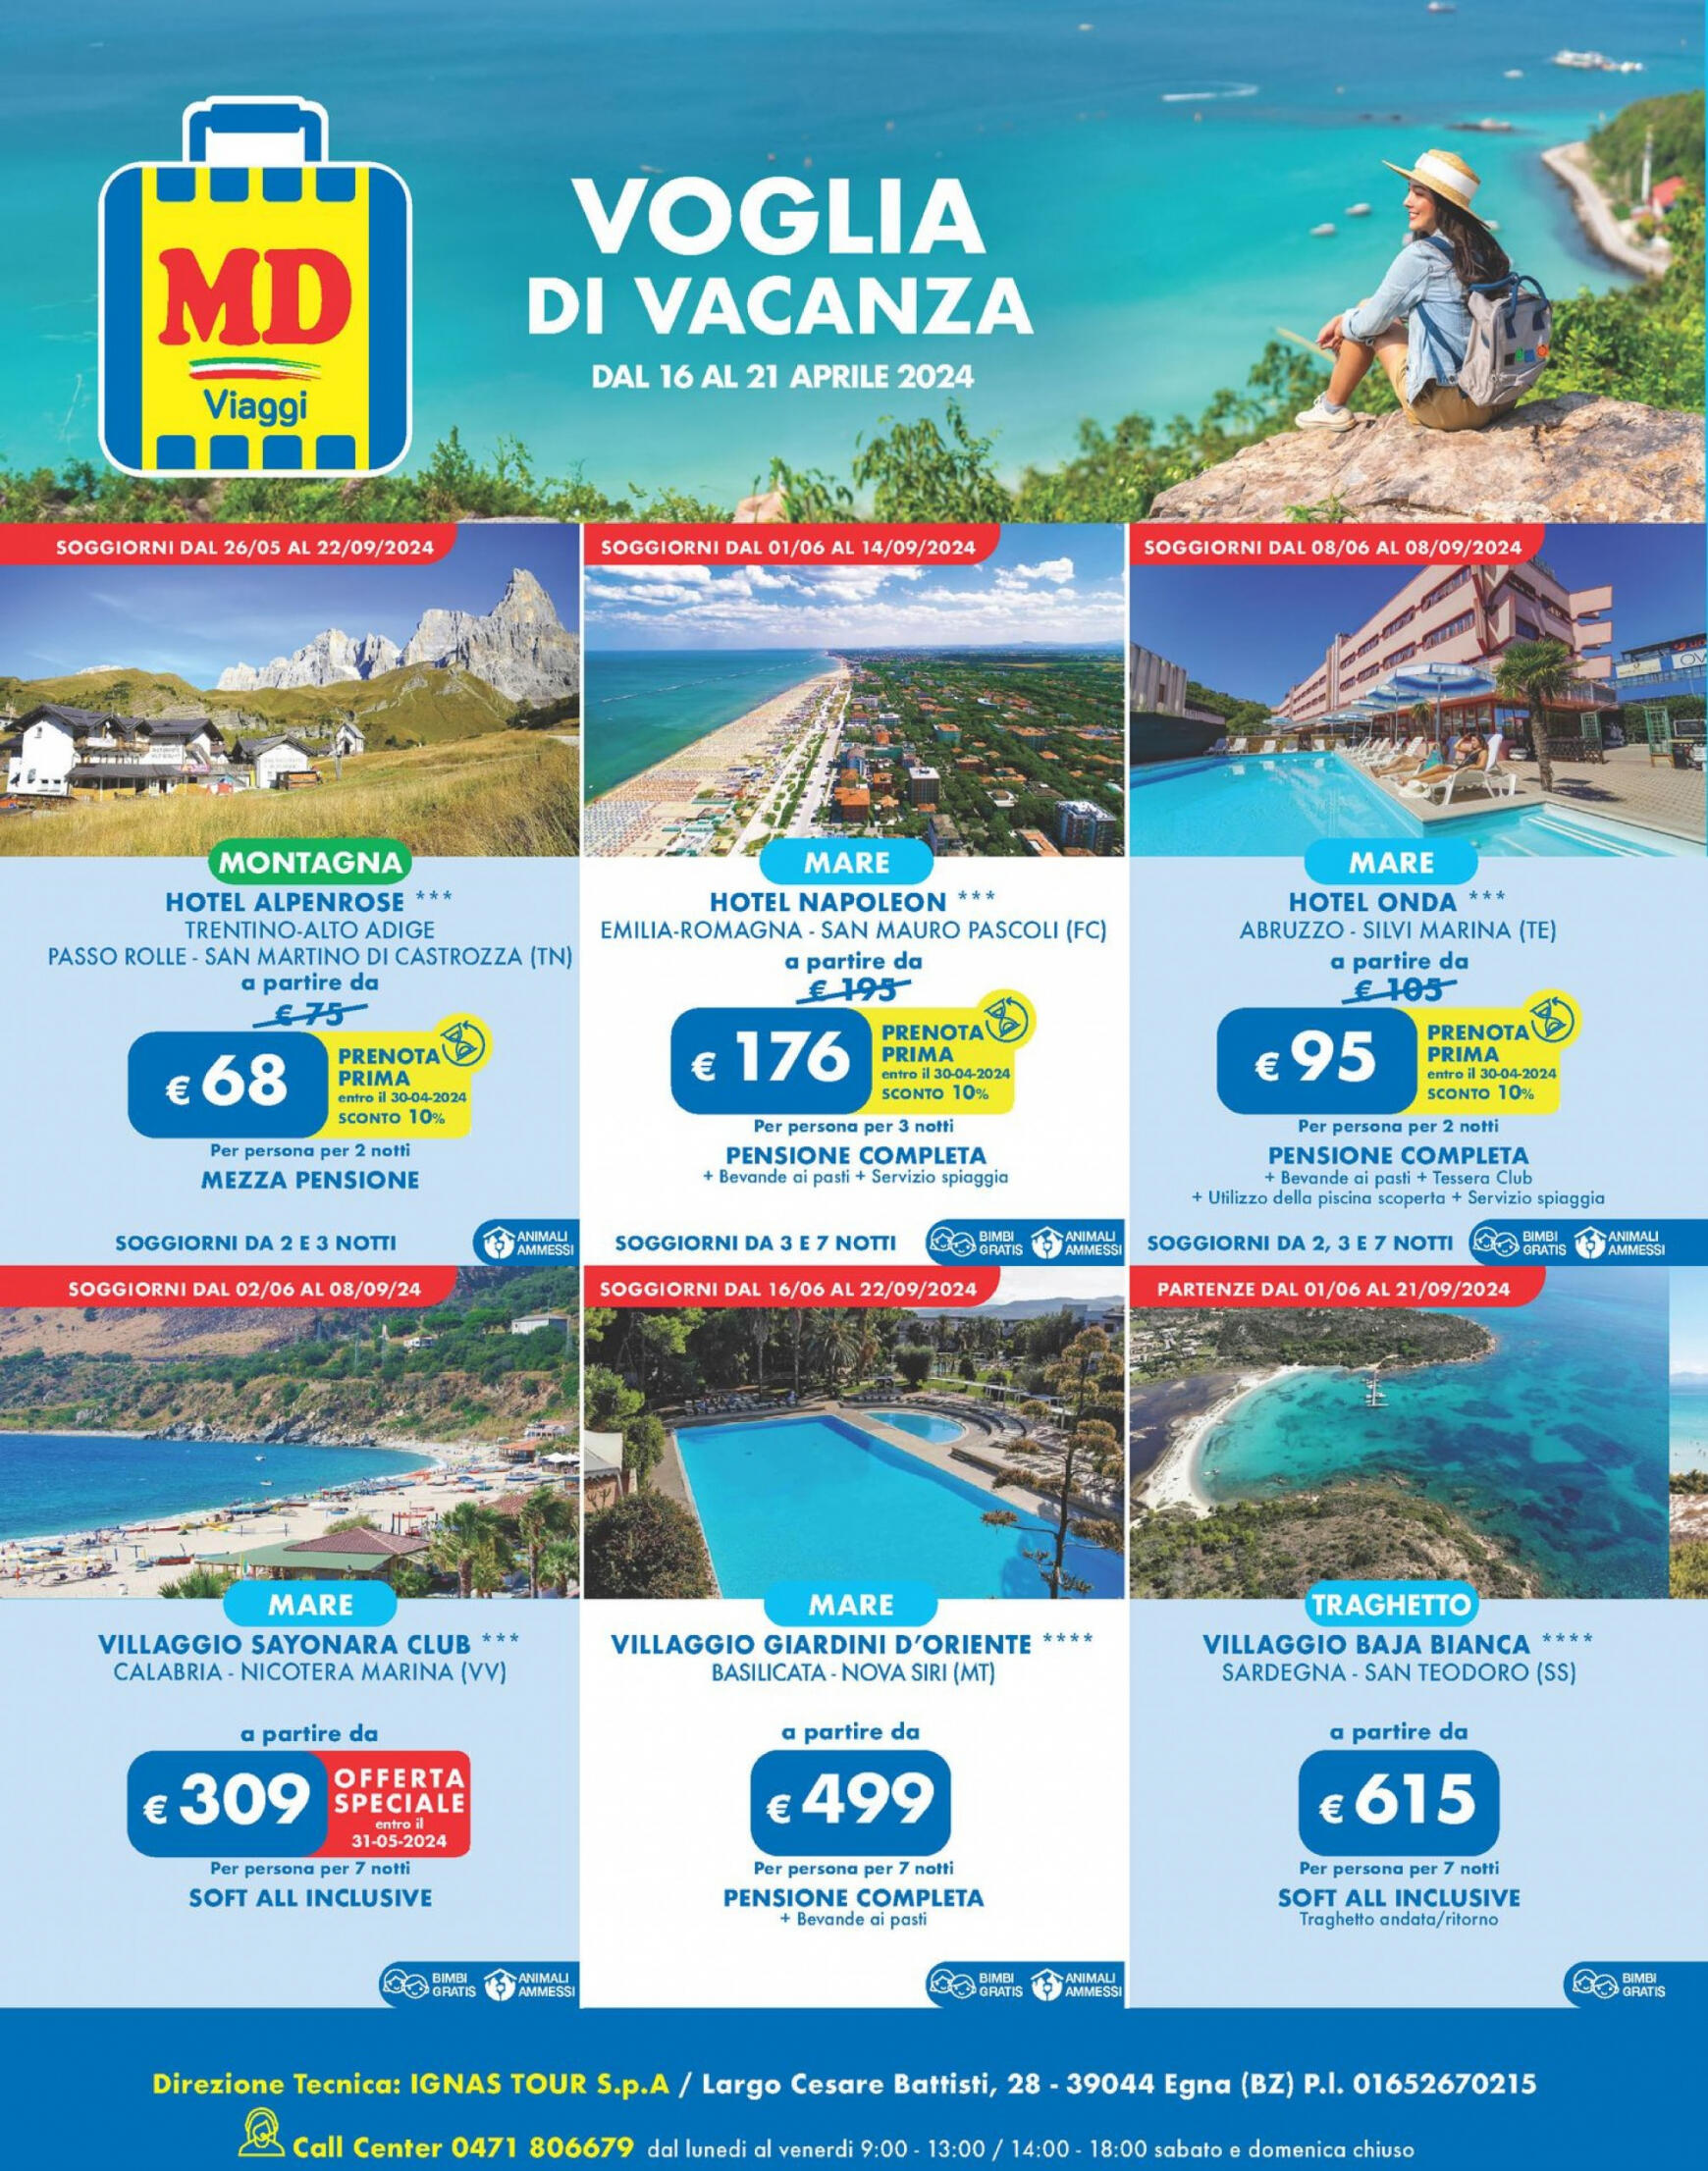 md-discount - Nuovo volantino MD 16.04. - 21.04. - page: 20